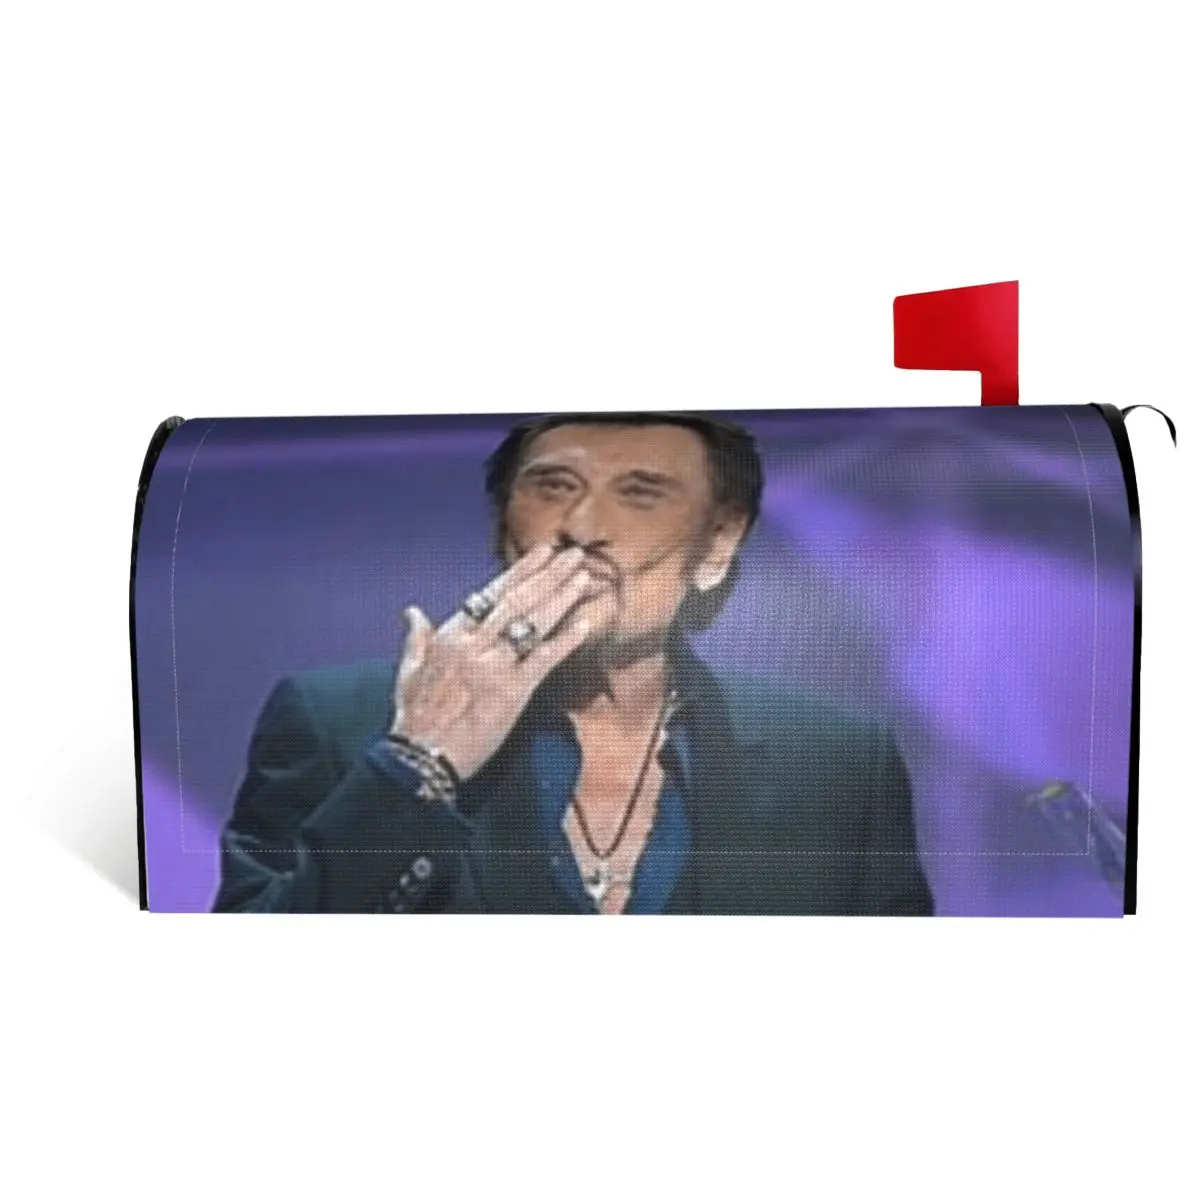 

Johnny And Hallyday Sticker B Mailbox Cover Novelty Orchestra mail matter Funny Novelty Postbox